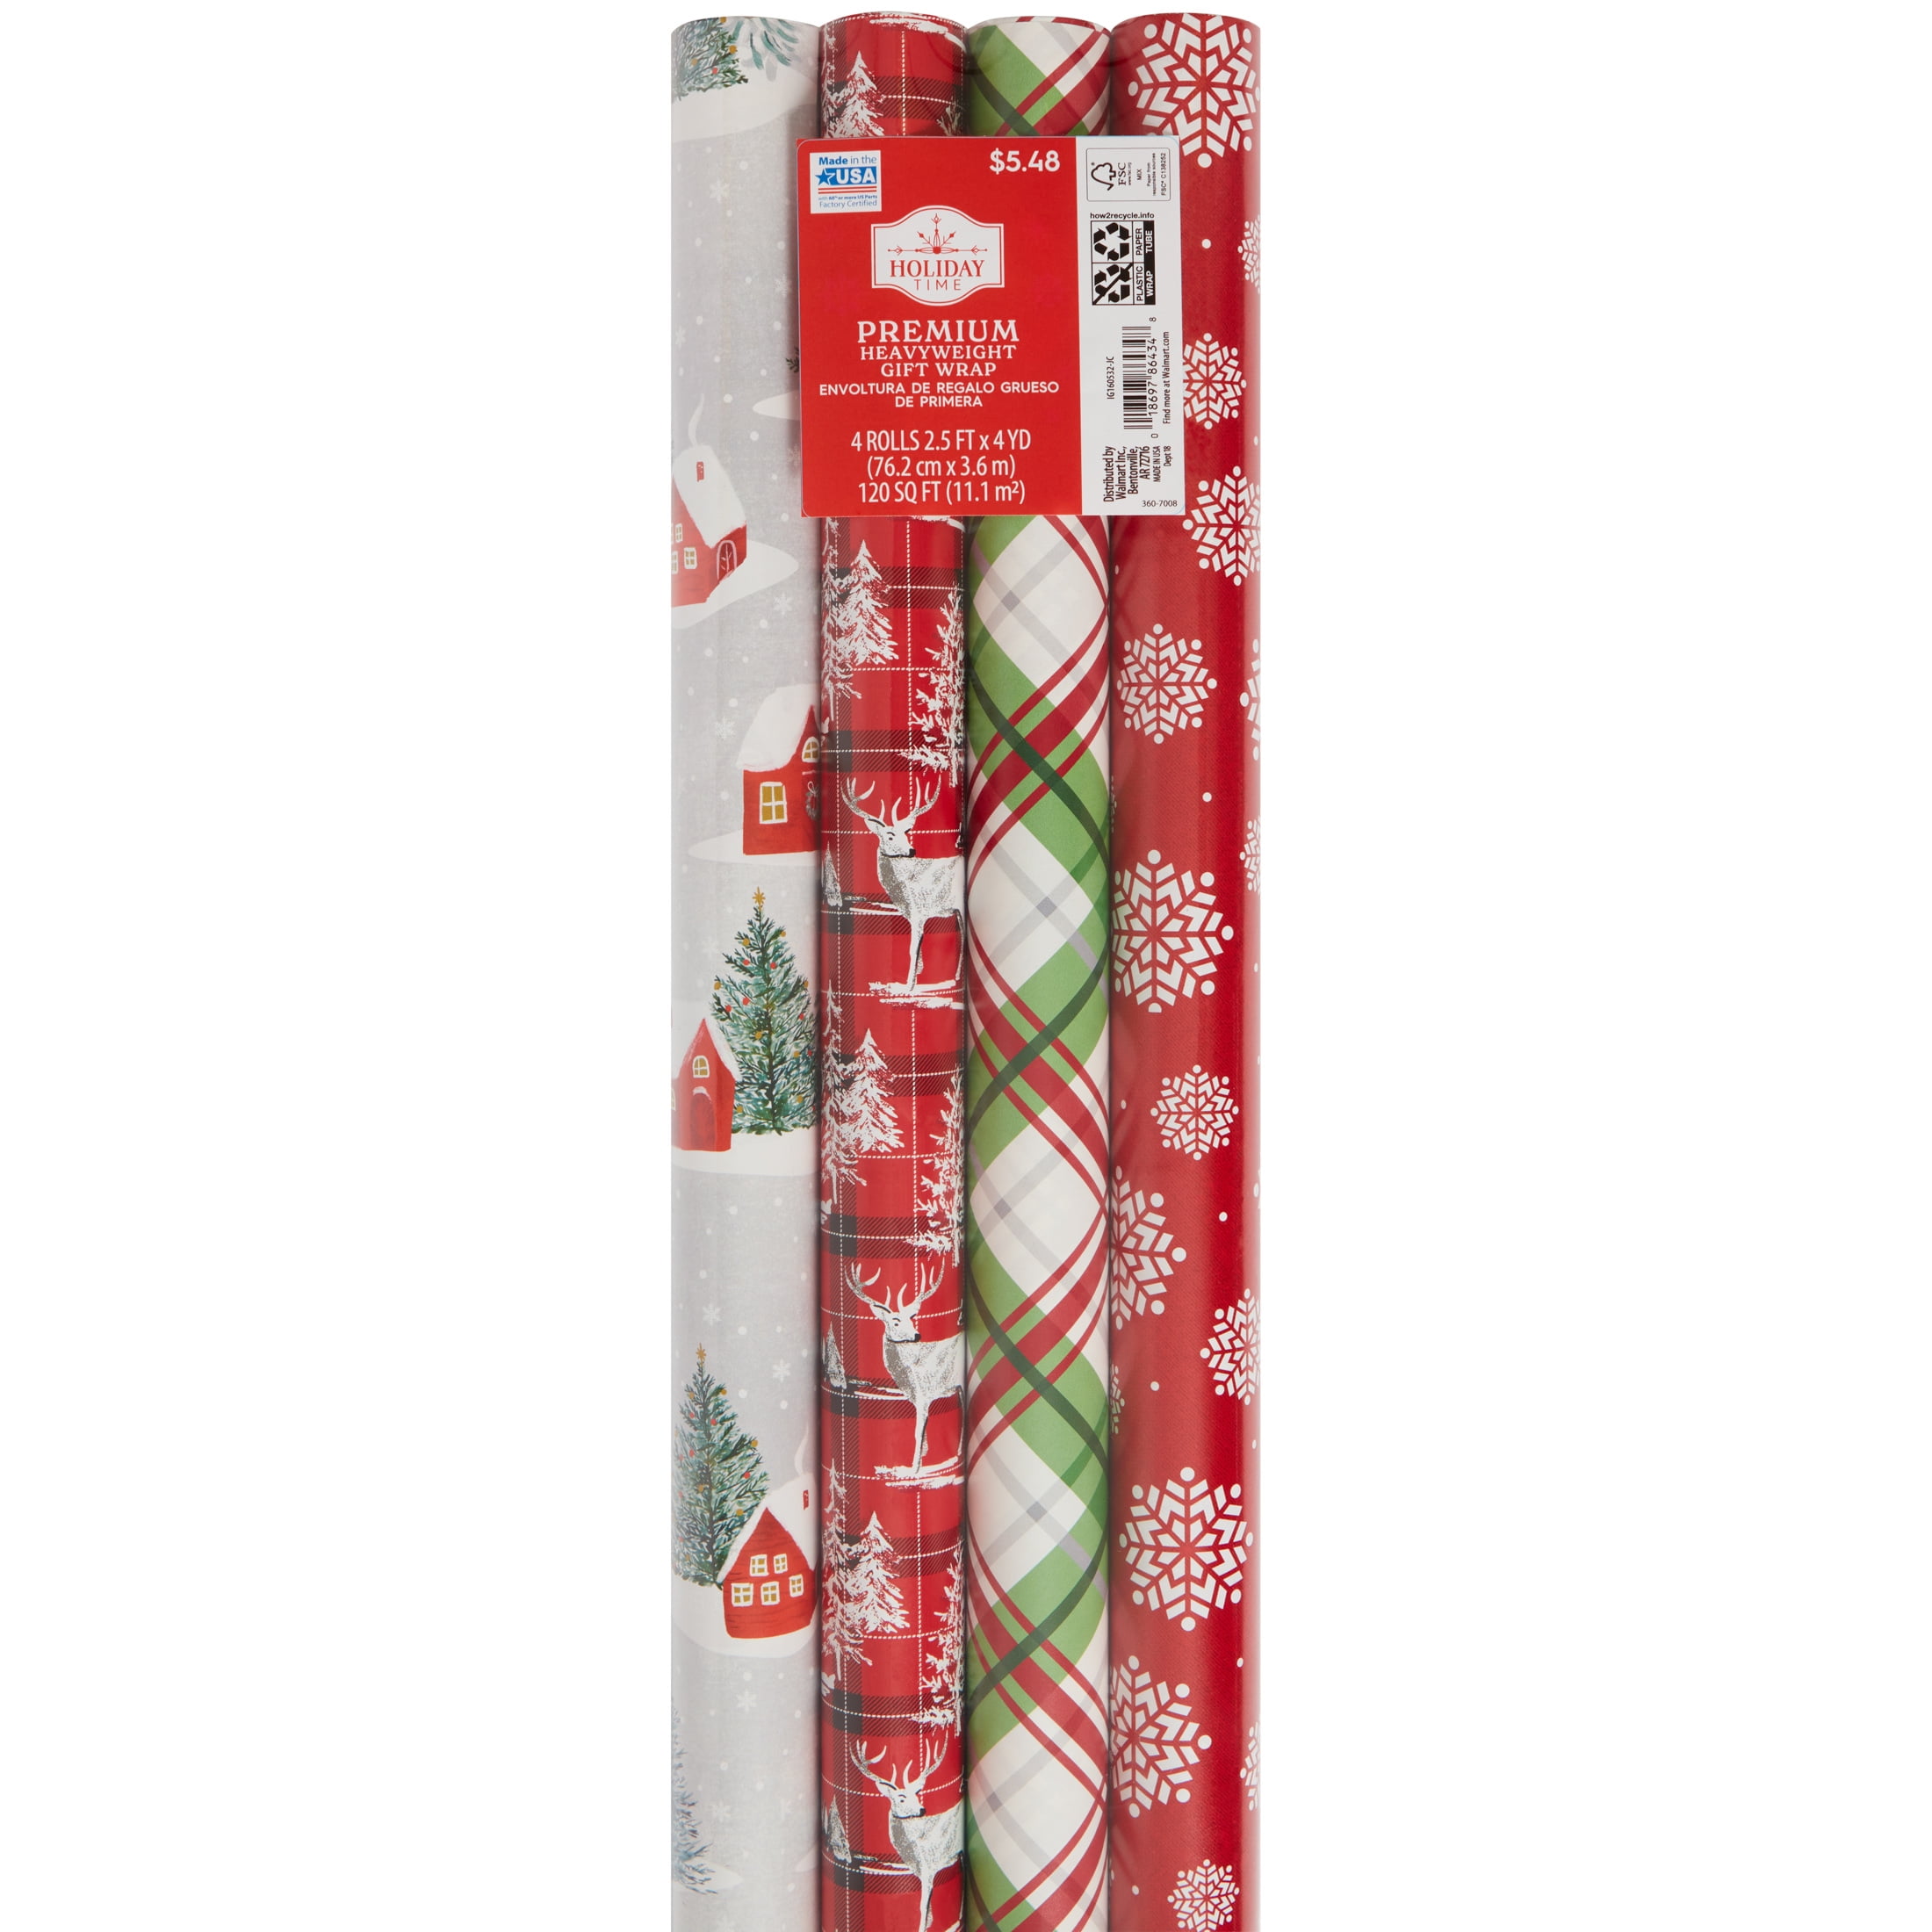 Woodland Charm 4-Pack Holiday Wrapping Paper Assortment, 120 sq